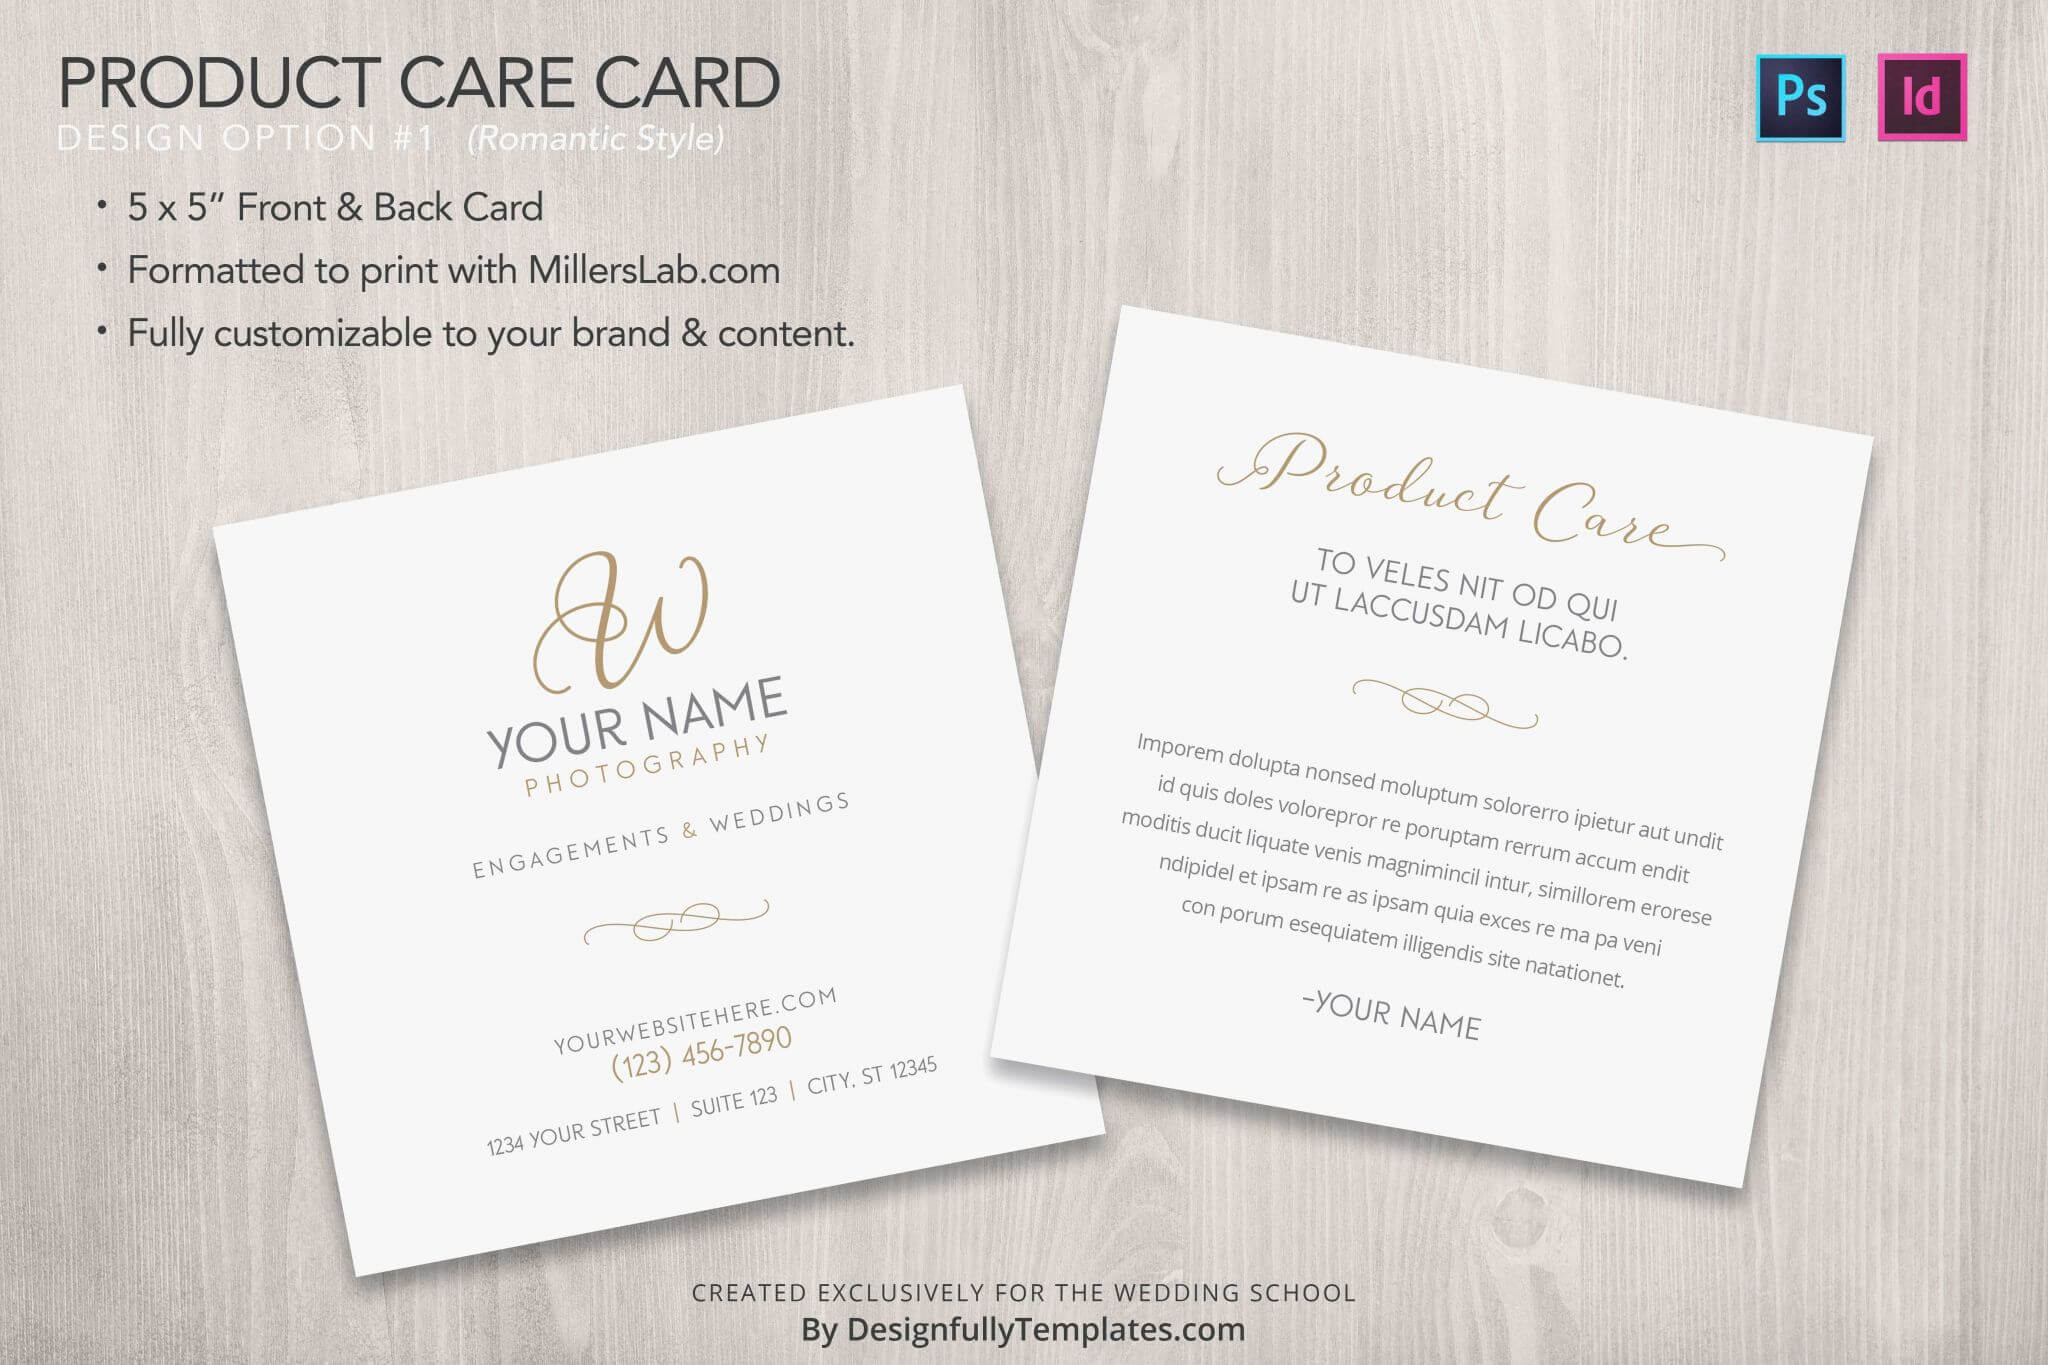 Free Place Card Templates 6 Per Page – Atlantaauctionco Pertaining To Free Template For Place Cards 6 Per Sheet